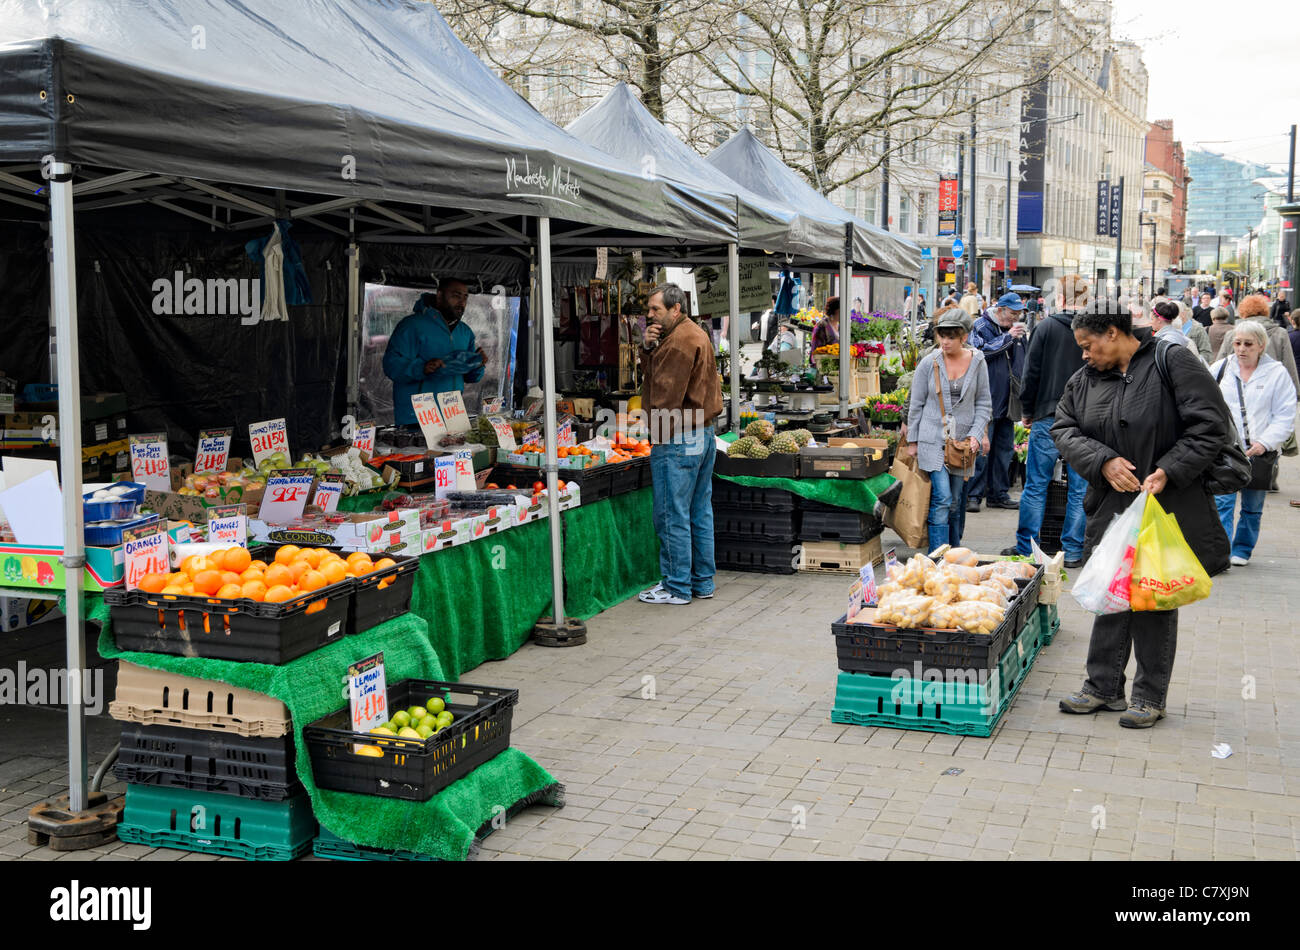 Outdoor market stalls in Piccadilly Gardens, Manchester, England. Customers represent the wide ethnic diversity of the city. Stock Photo